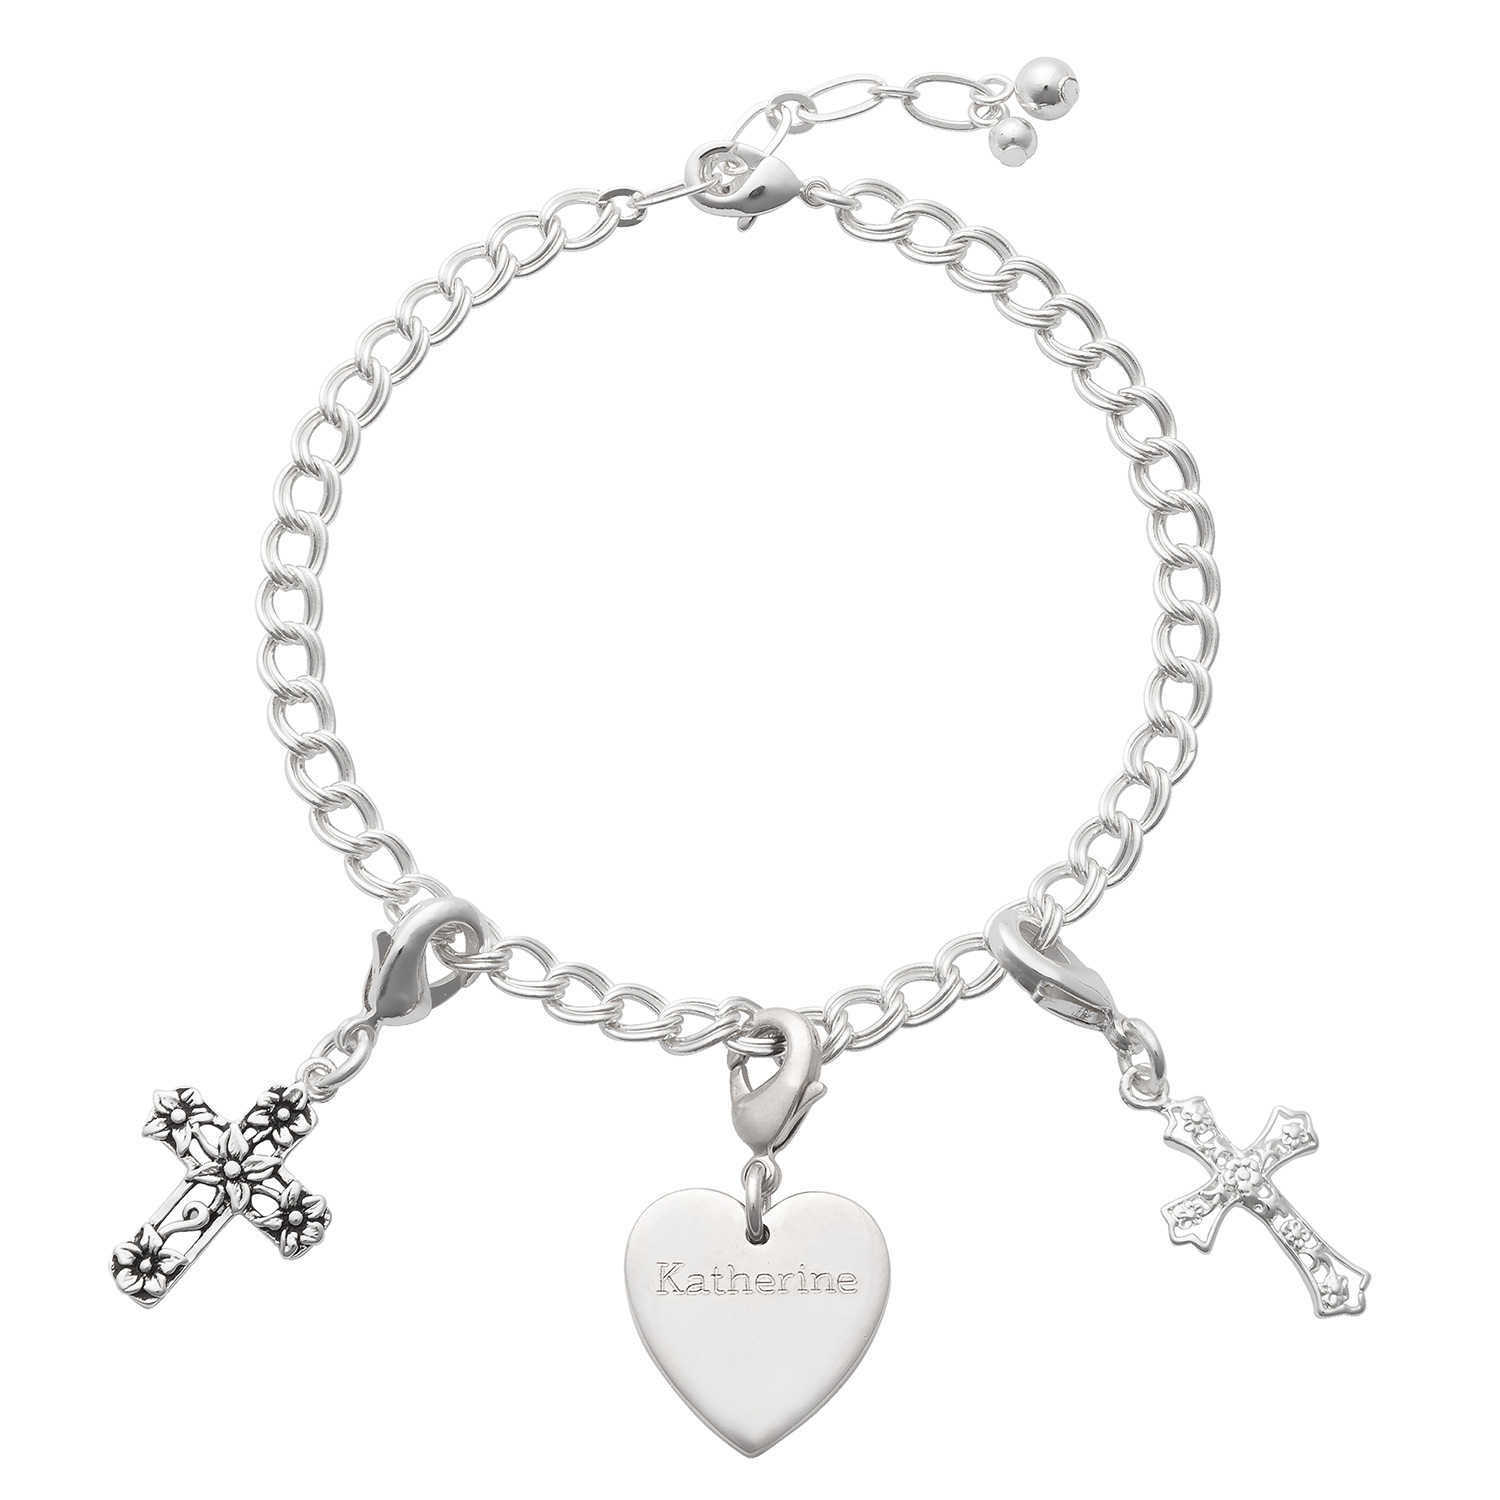 Silver Plated Charm Engraved Heart with Filigree Crosses Bracelet